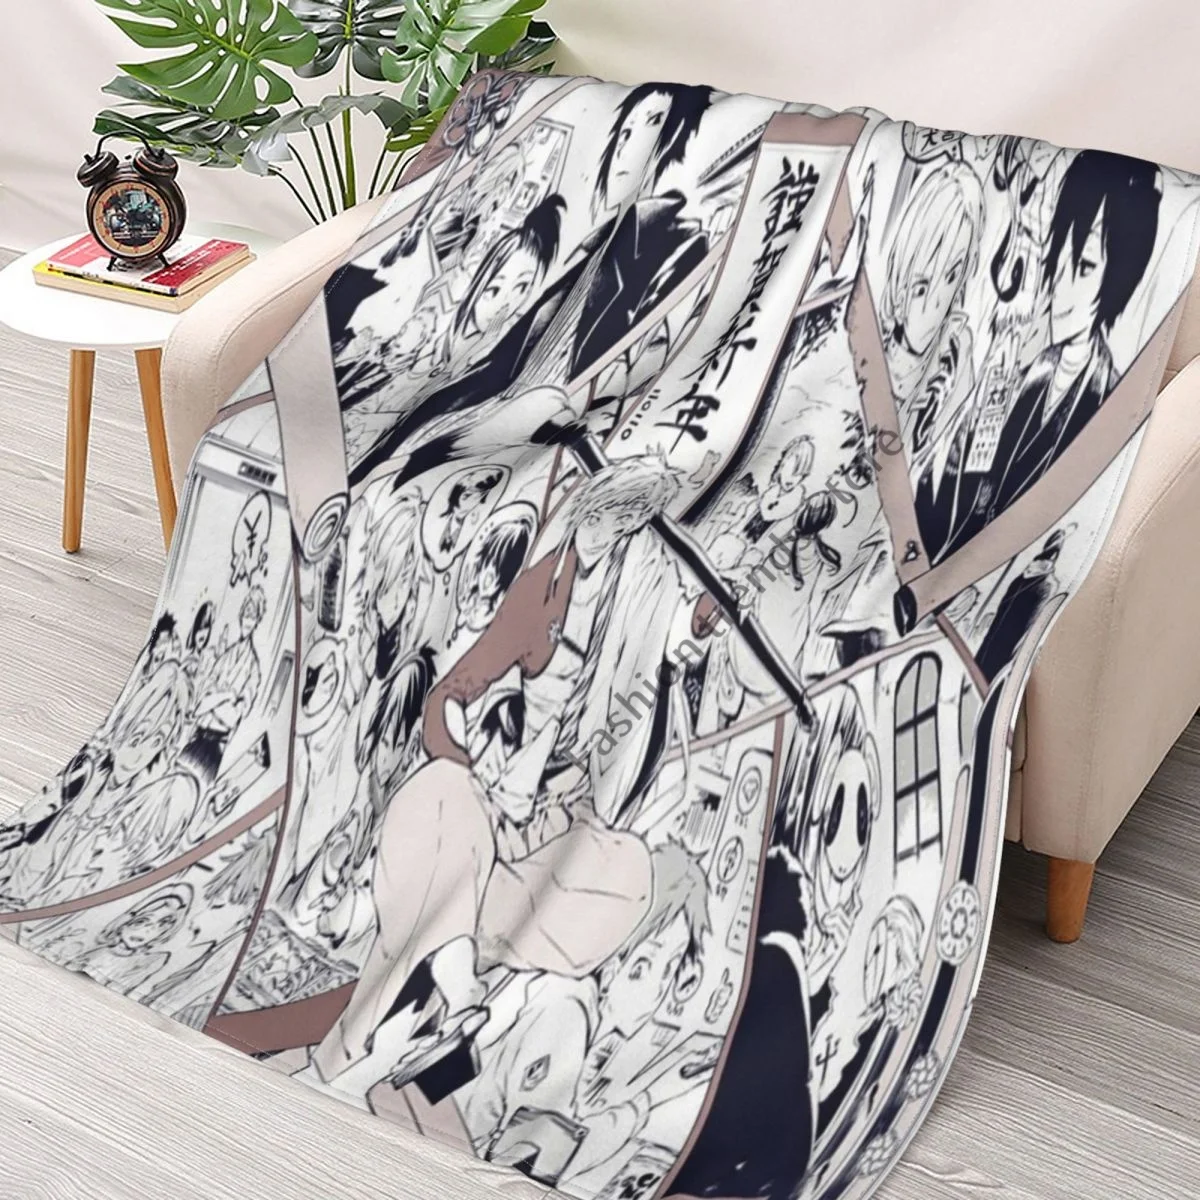 

Bungou Stray Dogs Blankets Flannel Printed Dazai Osamu Portable Super Soft Throw Blankets for Home Office Bedspreads